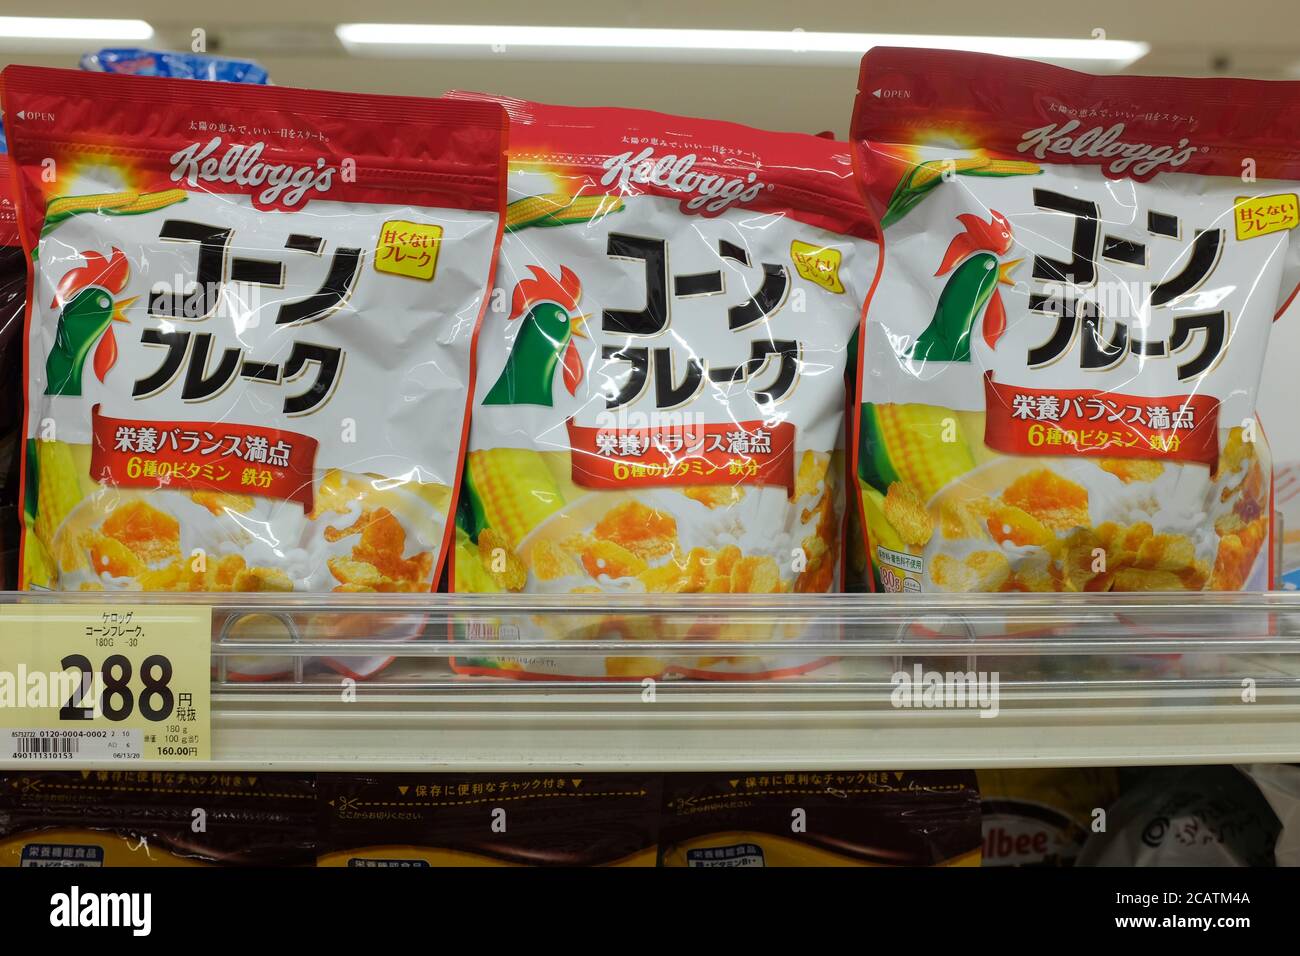 Packets of Kellogg's cornflakes in a supermarket in Japan. Stock Photo